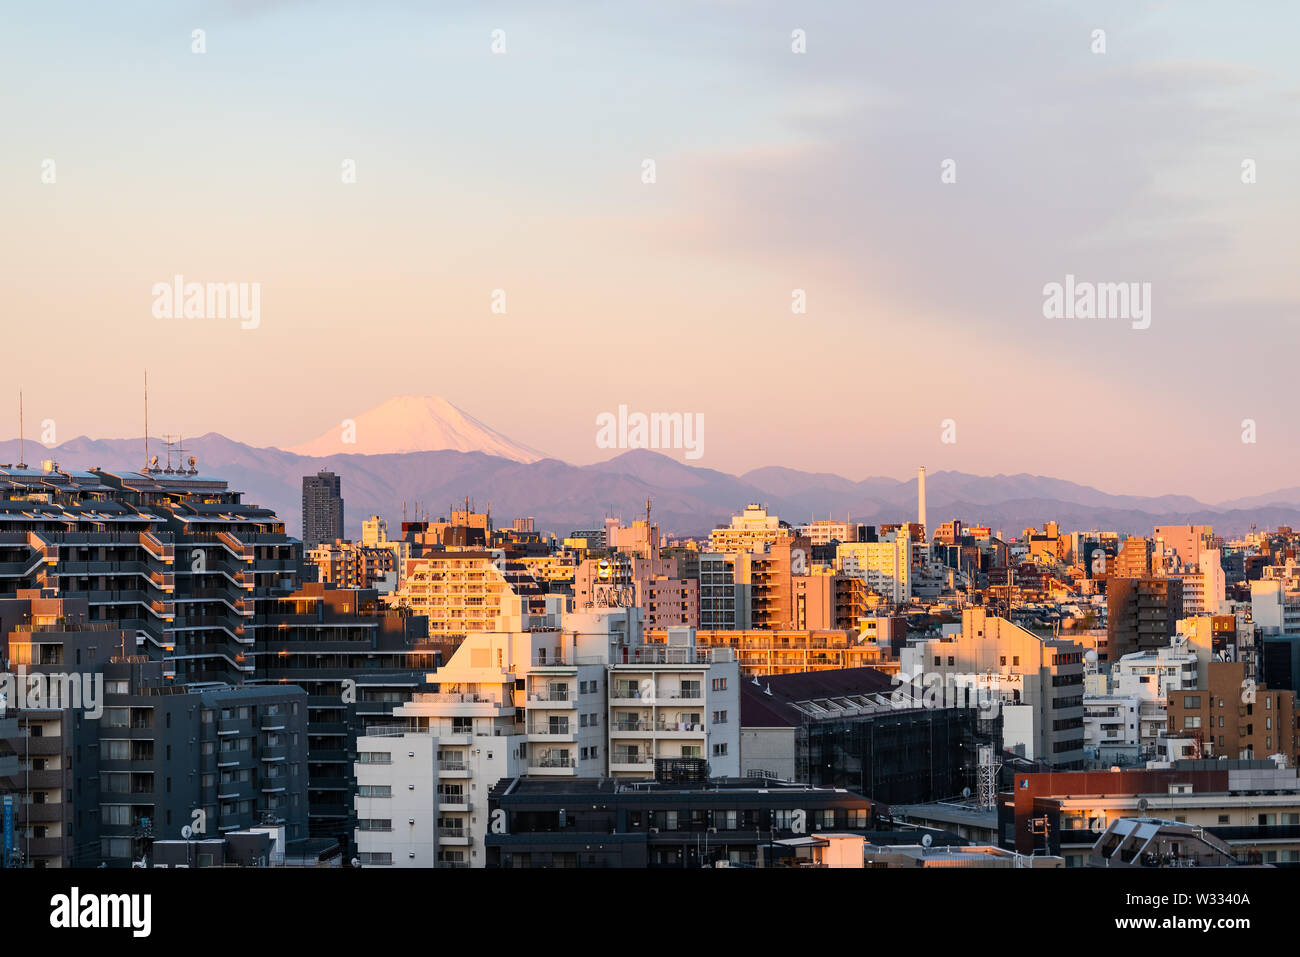 Colorful sunset in Tokyo, Japan Shinjuku cityscape with silhouette of Mount Fuji and golden sunlight, apartment buildings and mountains Stock Photo